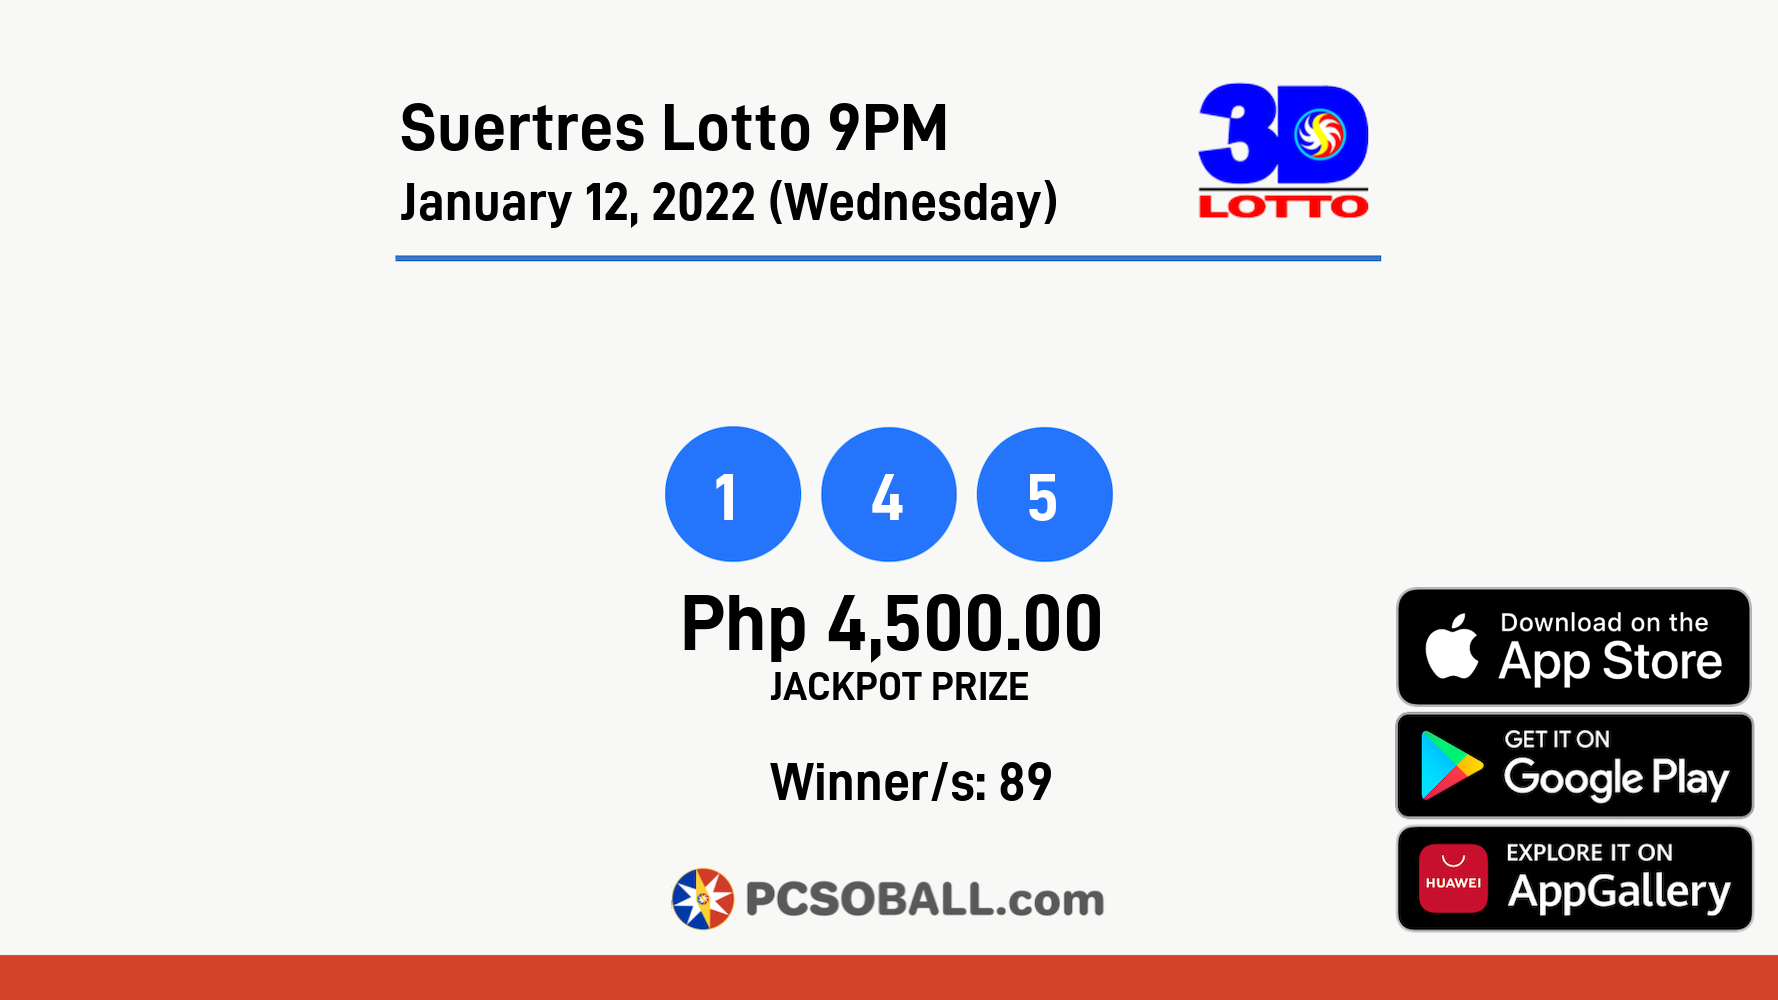 Suertres Lotto 9PM January 12, 2022 (Wednesday) Result